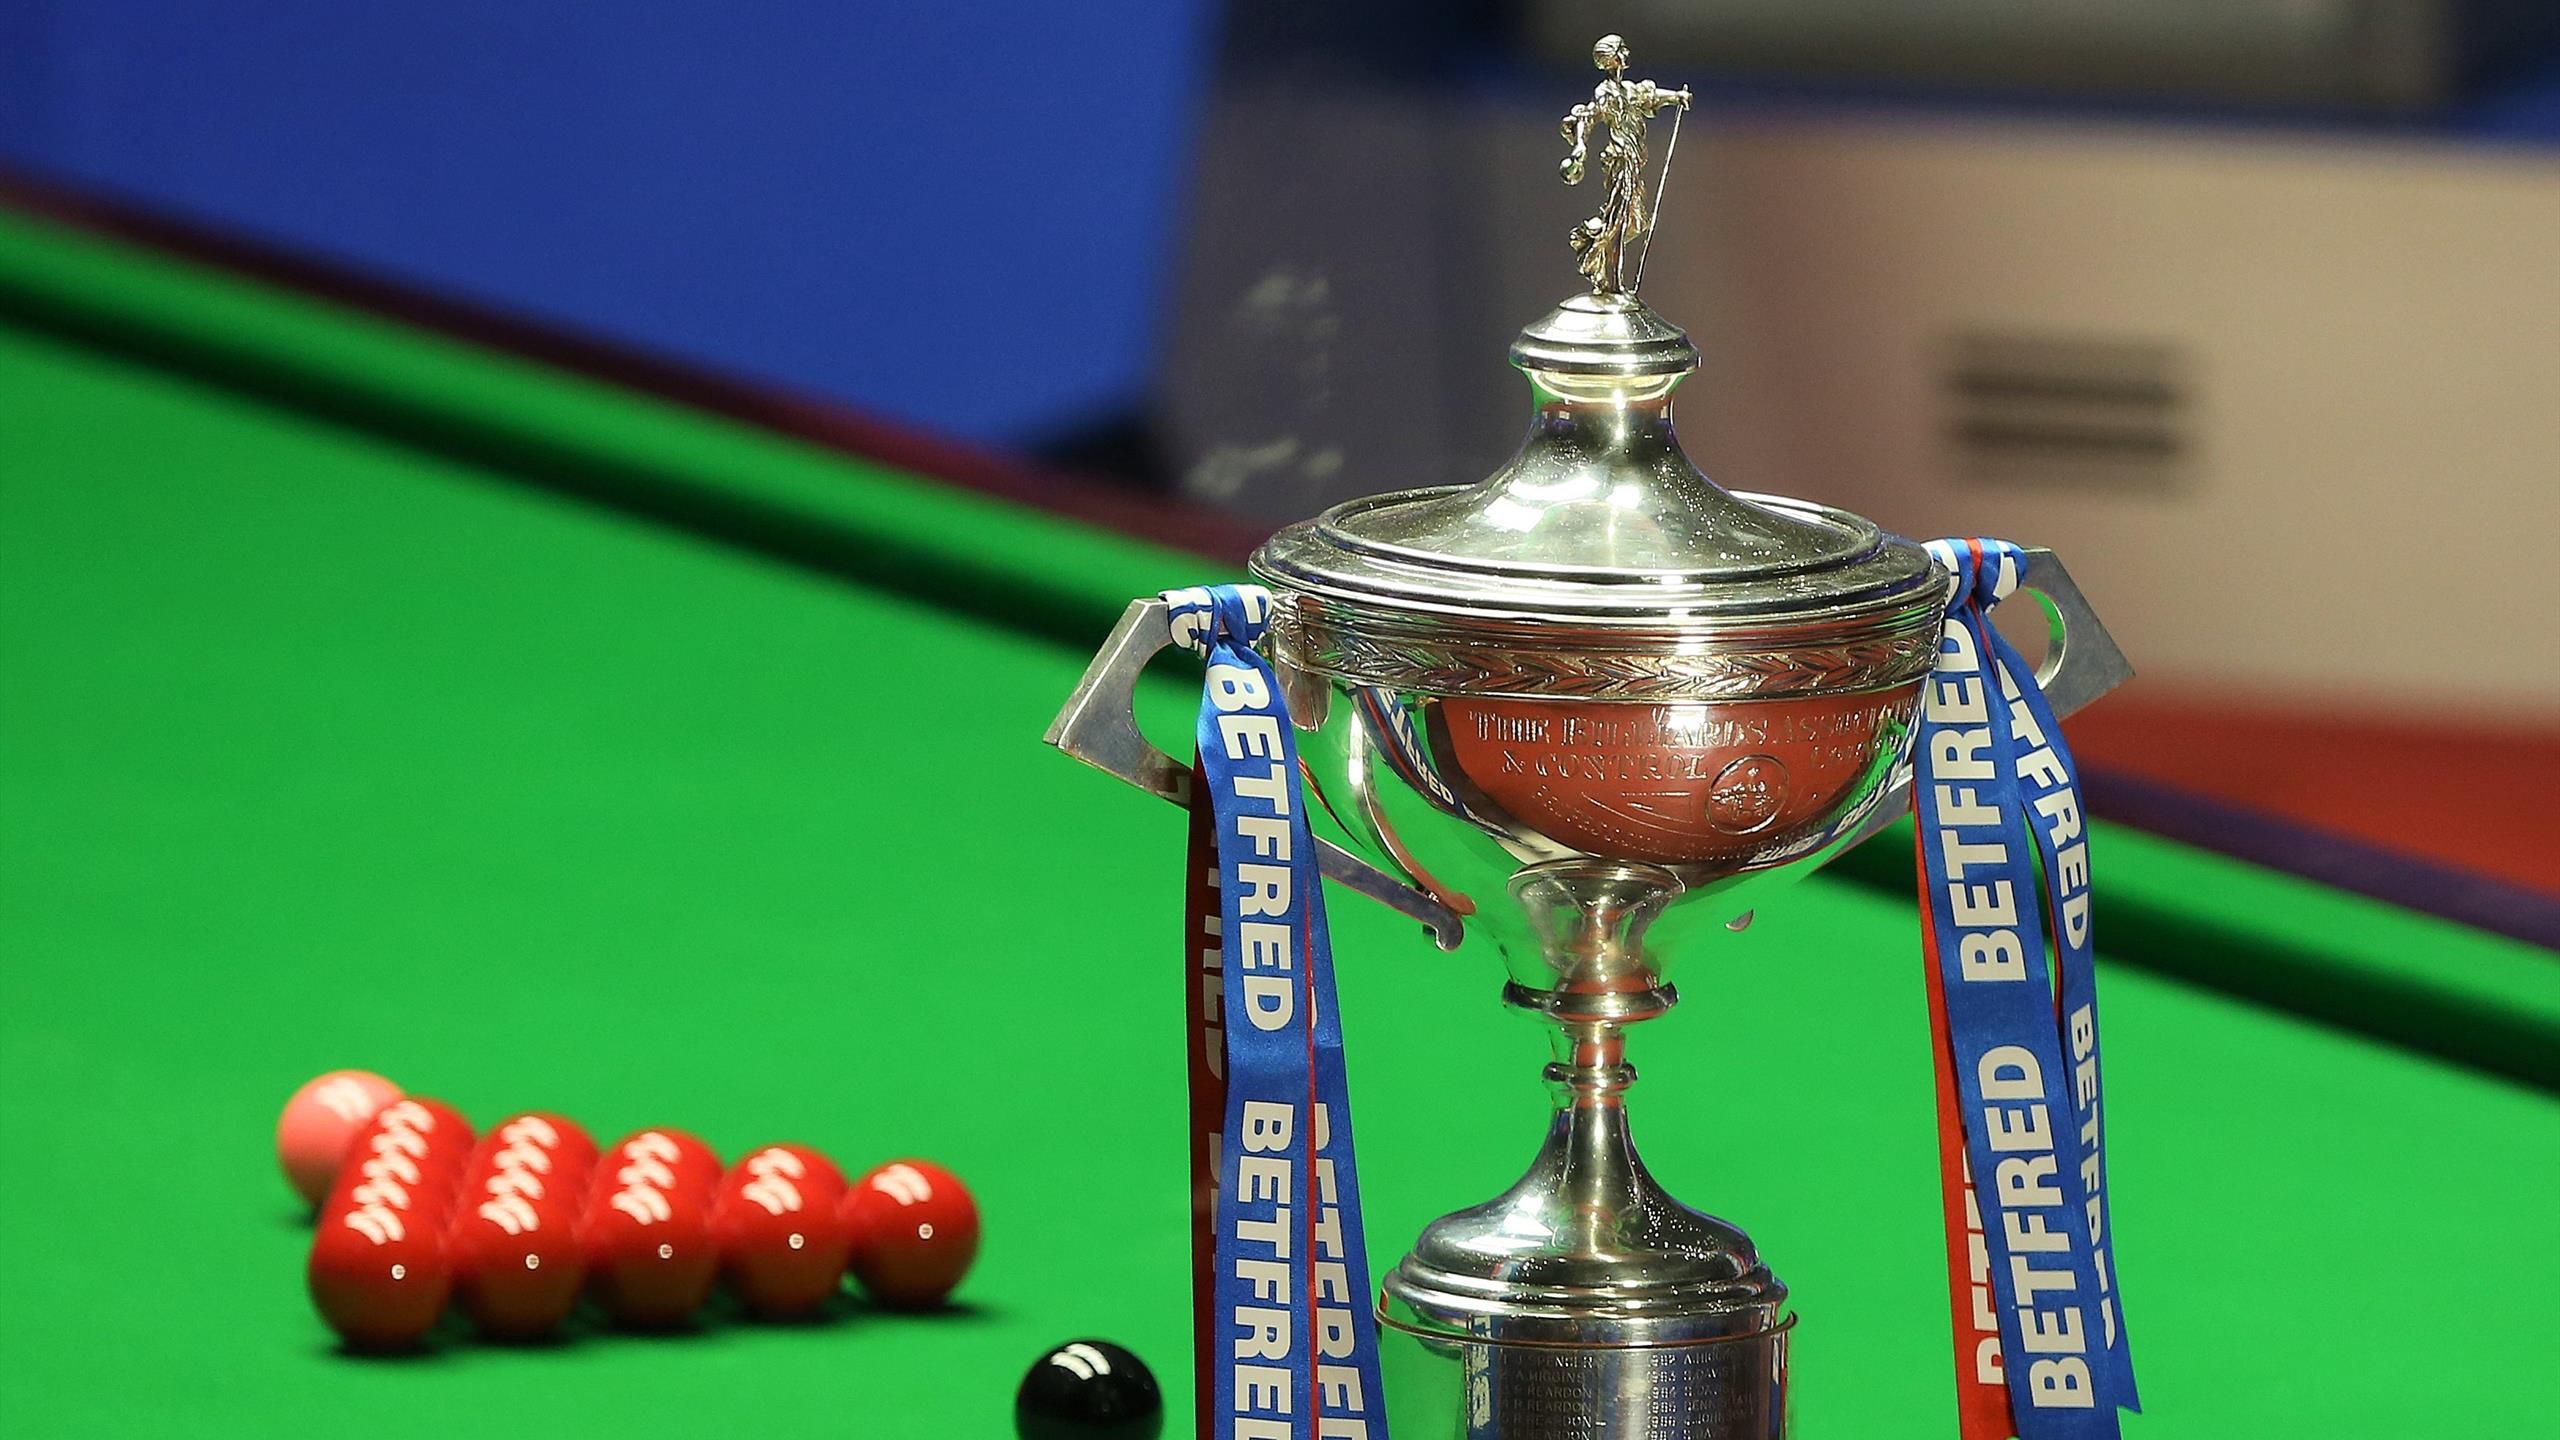 World Snooker Championship Latest qualifying results and match schedule